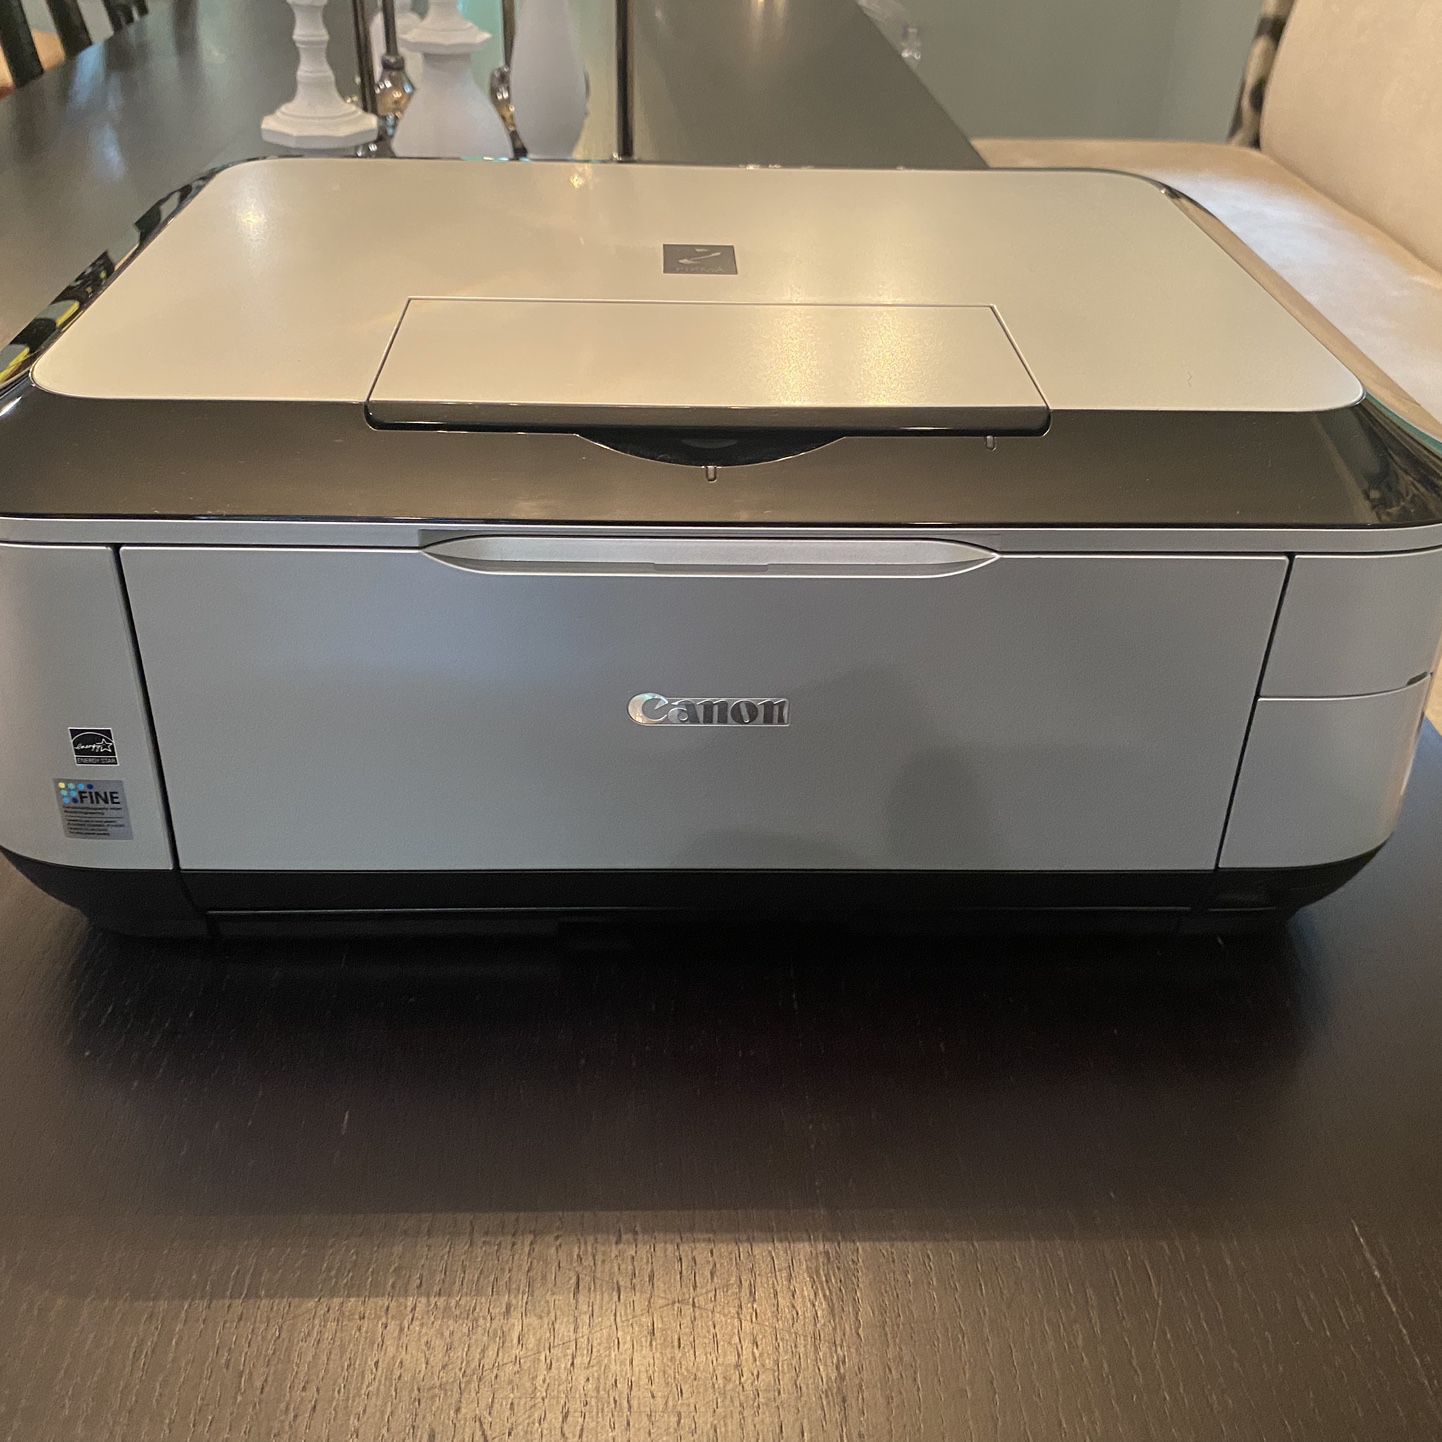 Canon PIXMA MP620 All-In-One Printer for Sale in Highland IL - OfferUp